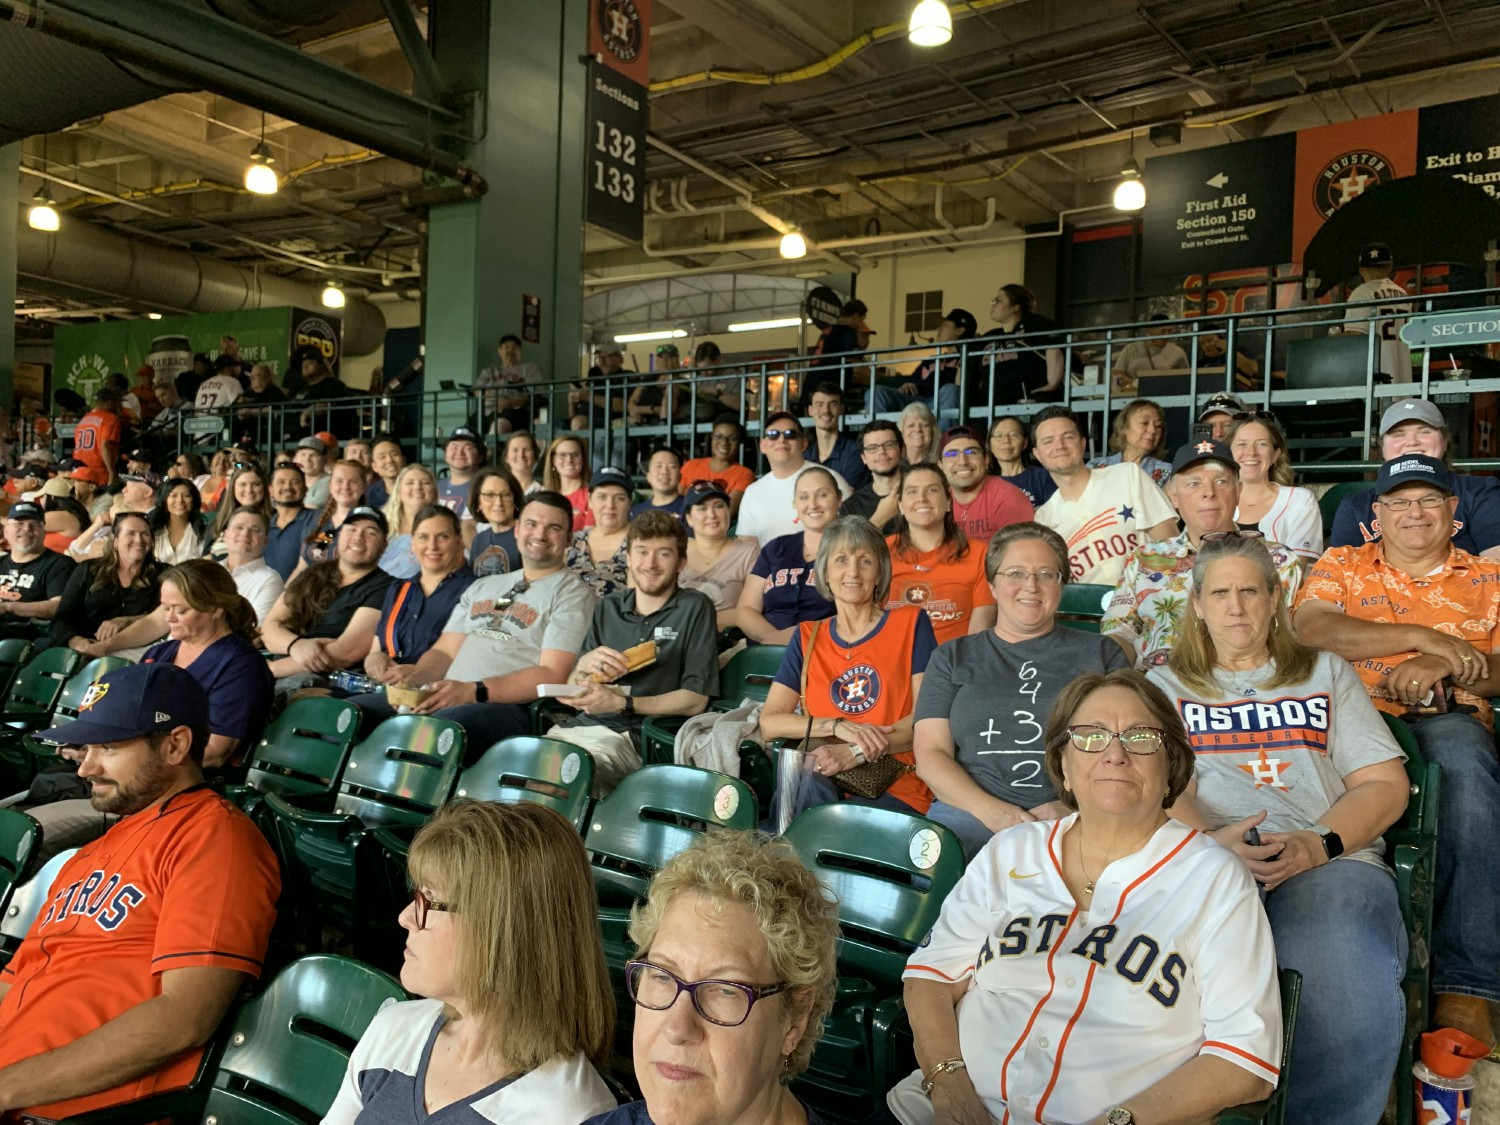 We have annual team bonding days. This one was a road trip to the Astros game in Houston.